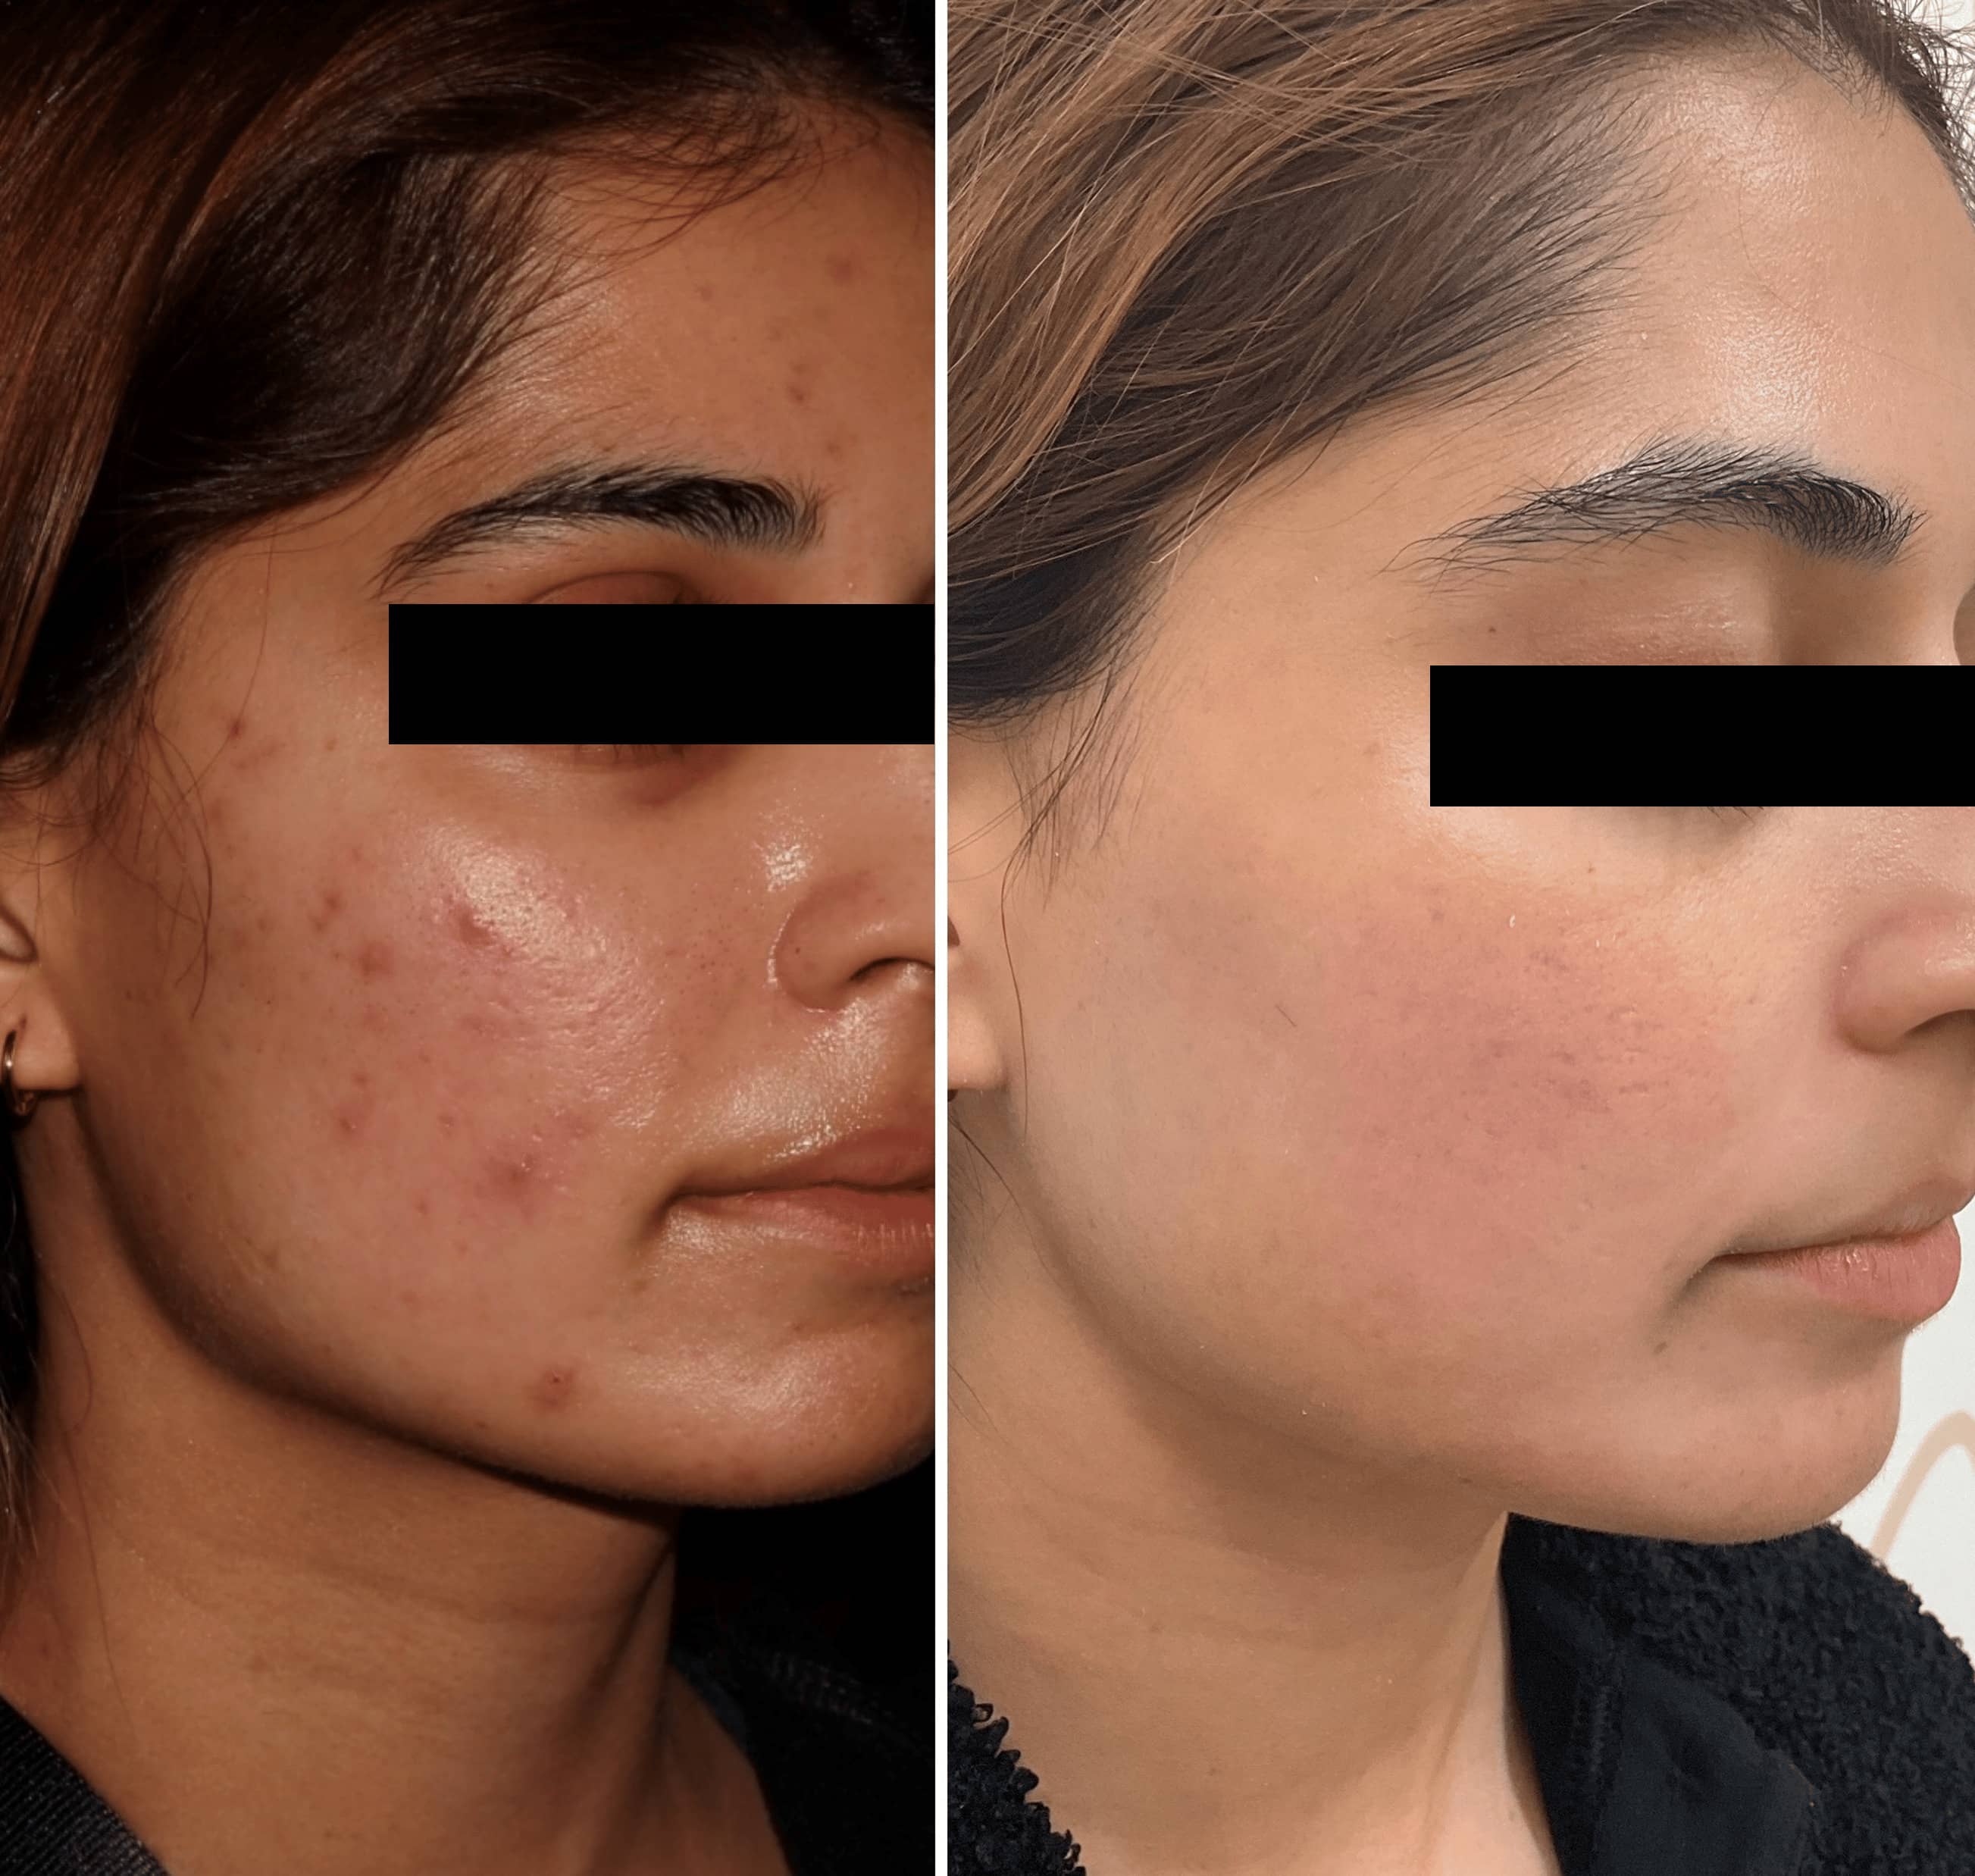 Treatment of acne and acne scars using medications and laser treatment